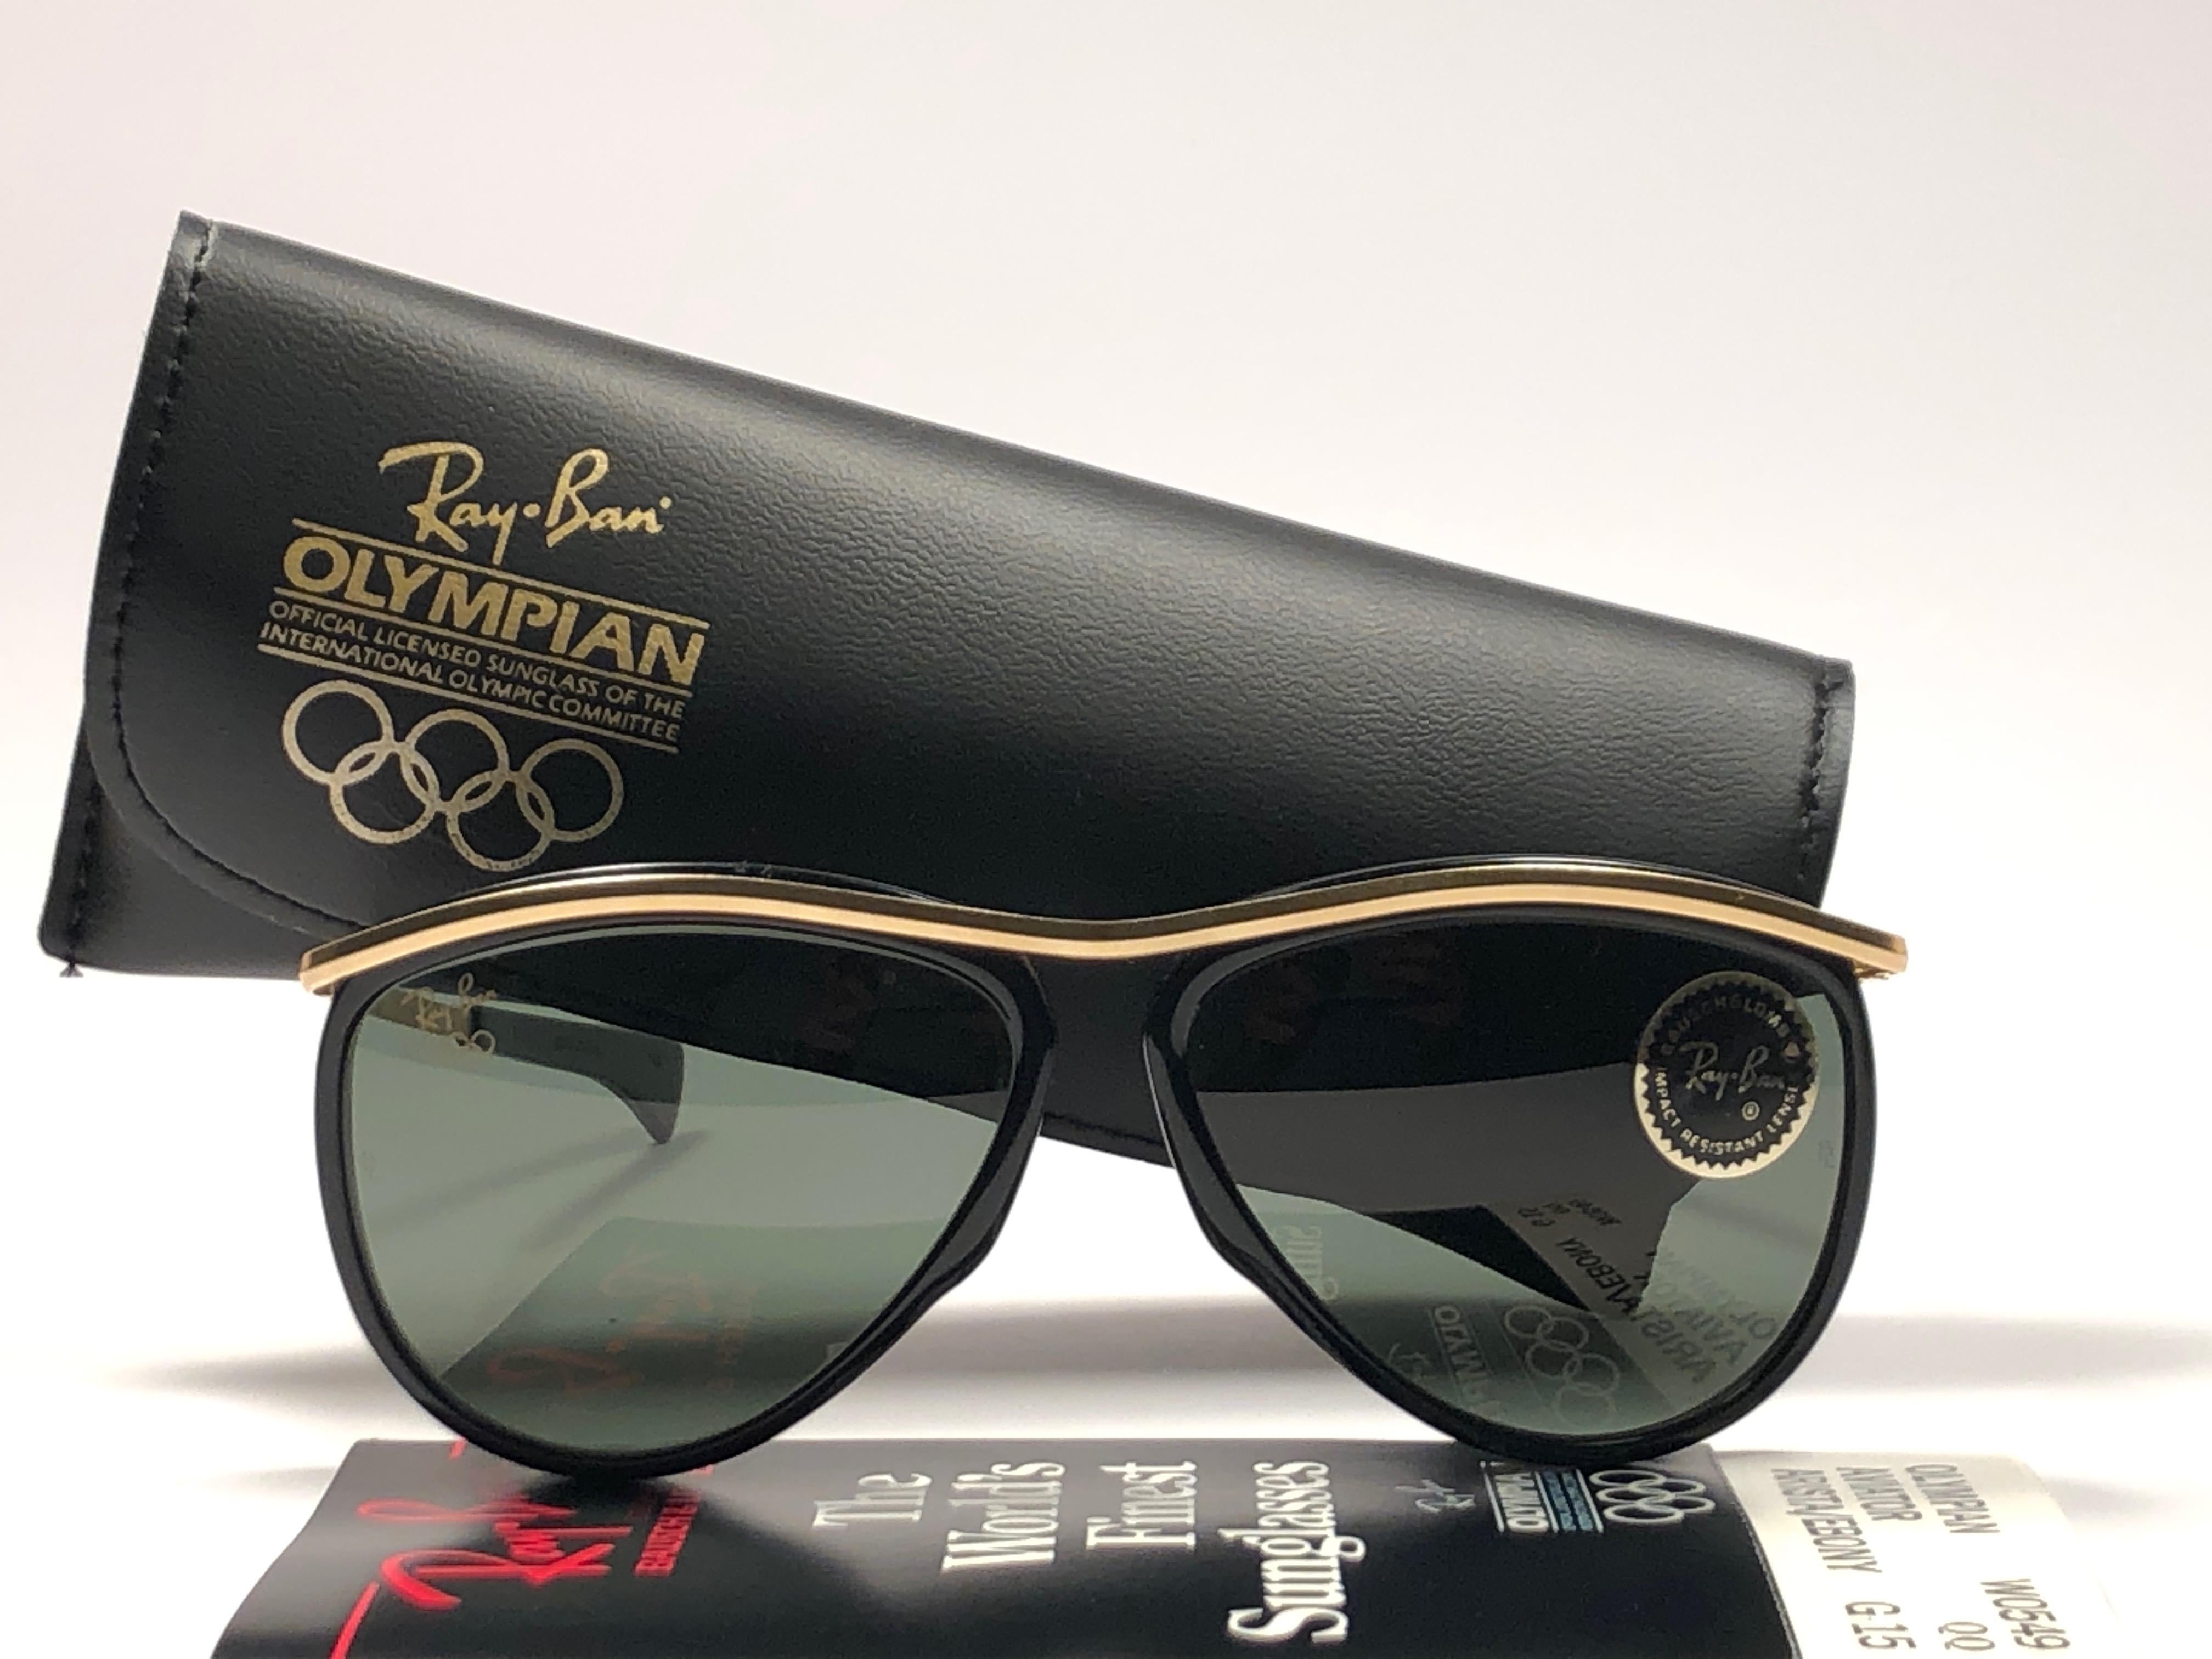 
New Ray Ban Olympics Series. B&L etched in both G15 grey lenses.  Please notice that this item is nearly 40 years old and could show some storage wear. 

New, ever worn or displayed. Made in USA. FULL SET.

FRONT : 14.5 CMS
LENS HEIGHT : 4.8